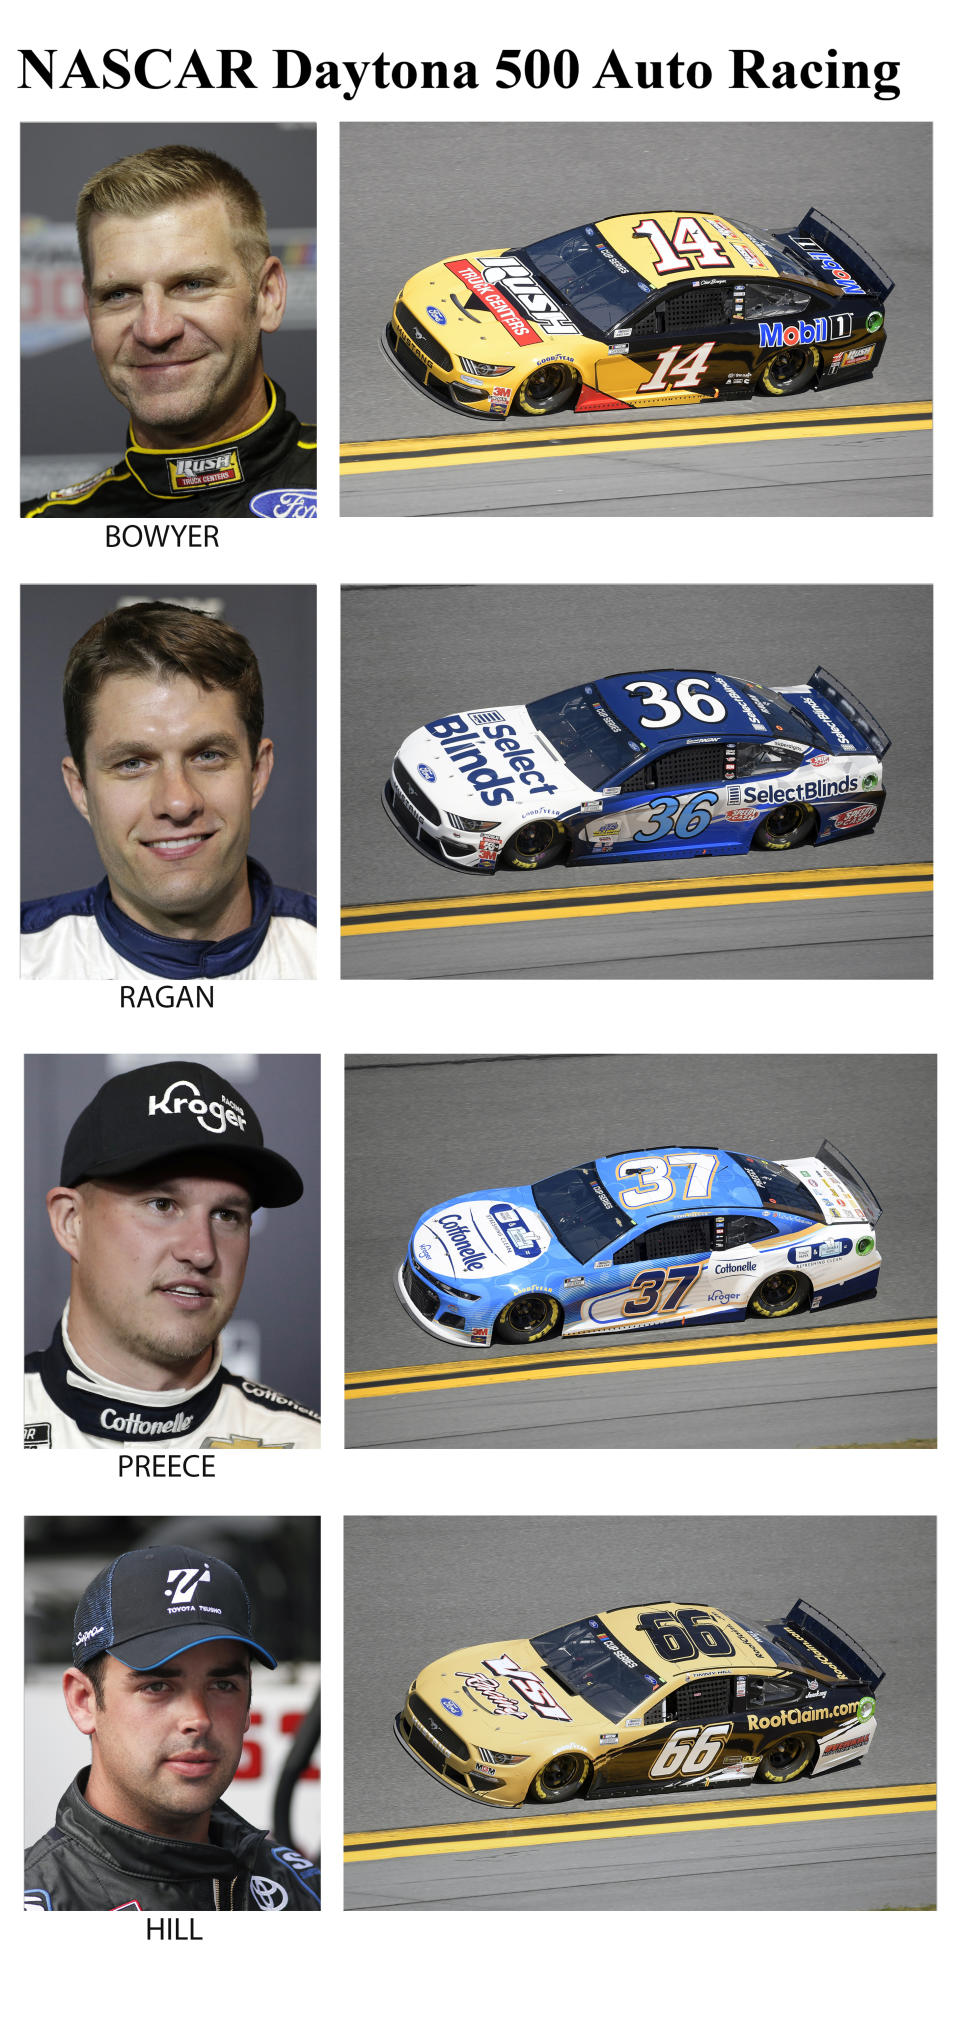 These photos show drivers in the starting lineup for Sunday's NASCAR Daytona 500 auto race in Daytona Beach, Fla. From top are Clint Bowyer, 29th position; David Ragan, 30th position; Ryan Preece, 31st position and Timmy Hill, 32nd position. (AP Photo)